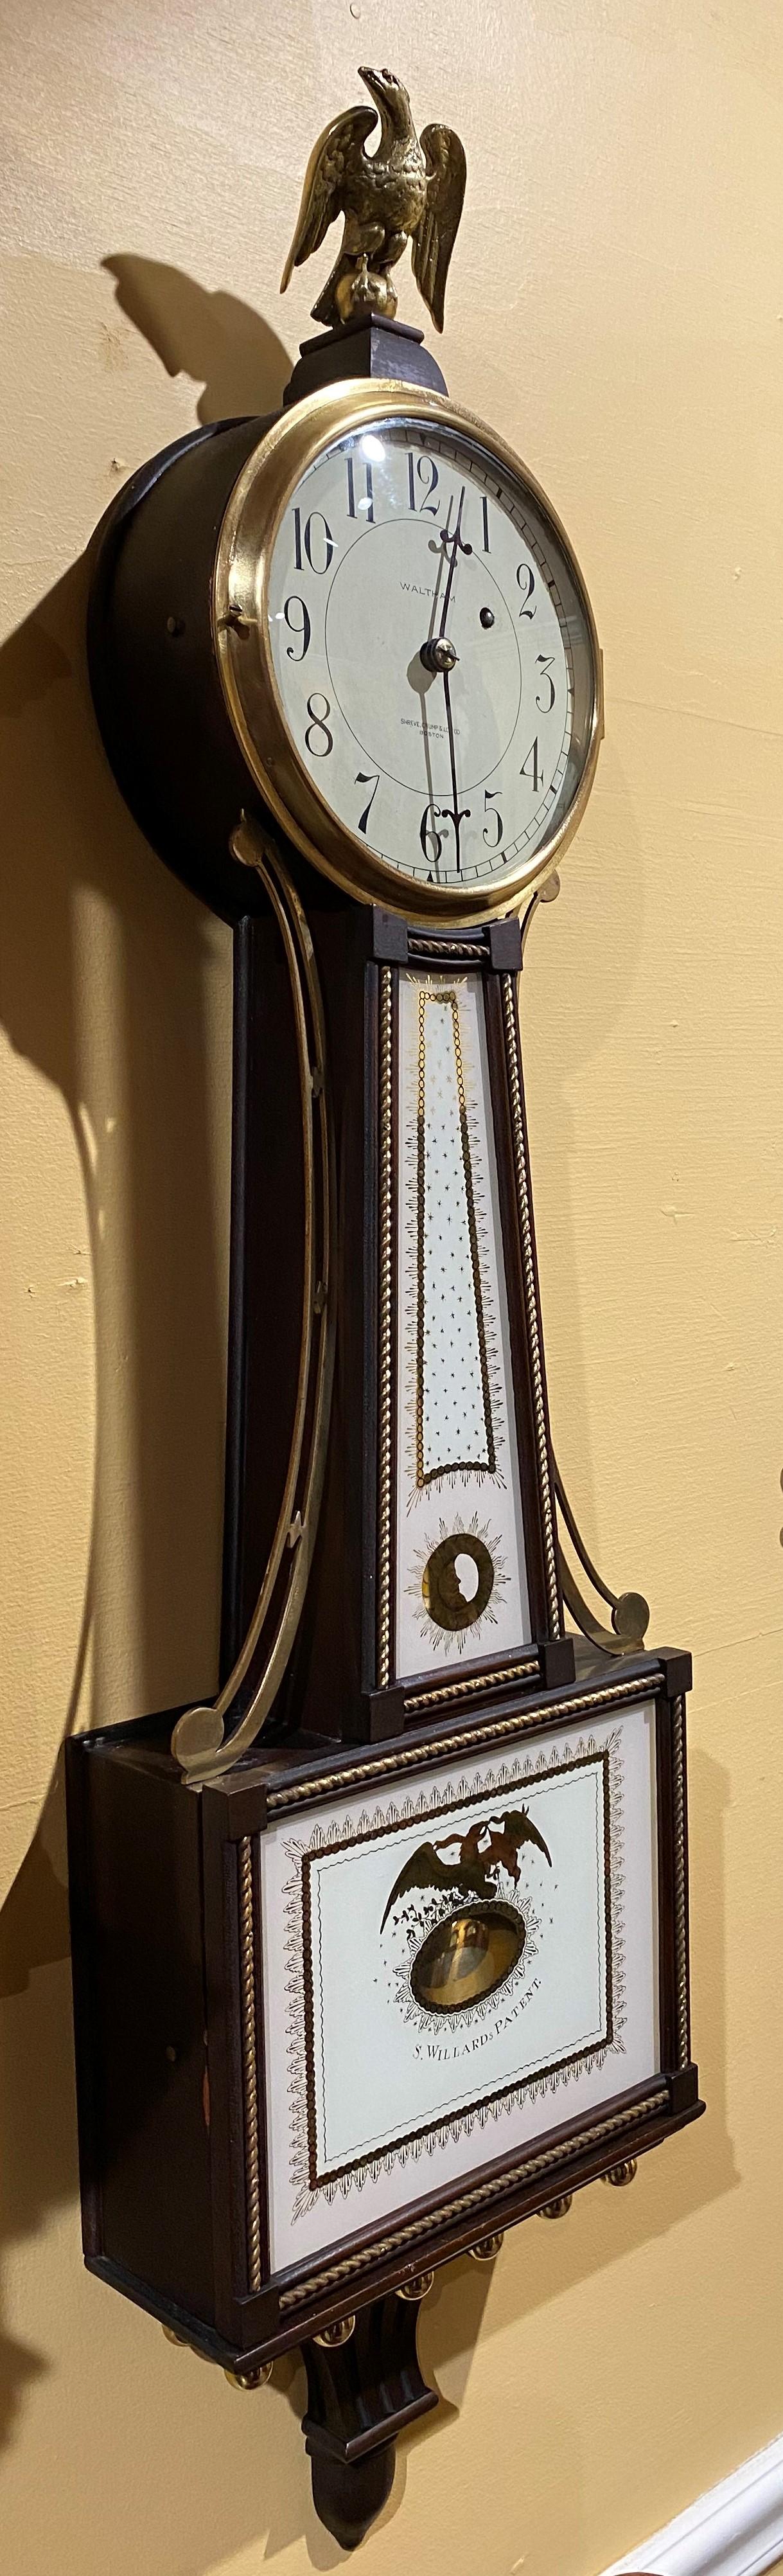 Brass Waltham 8 Day Banjo Clock for Shreve Crump and Low, Simon Willard Patent For Sale